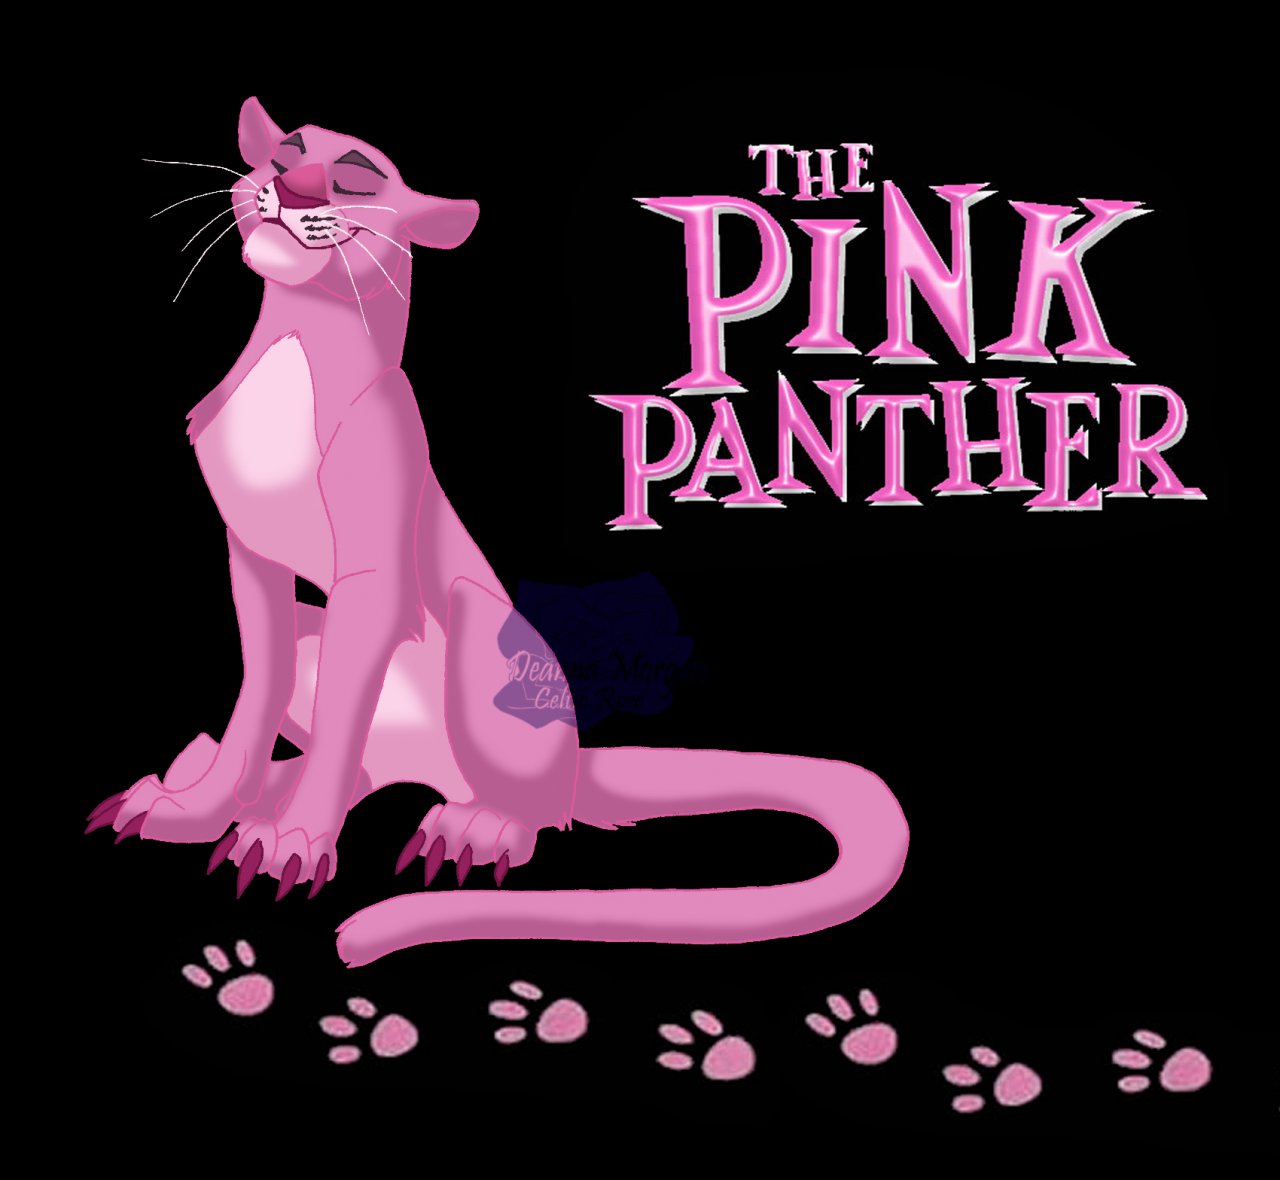 the pink panther fanart｜TikTok Search